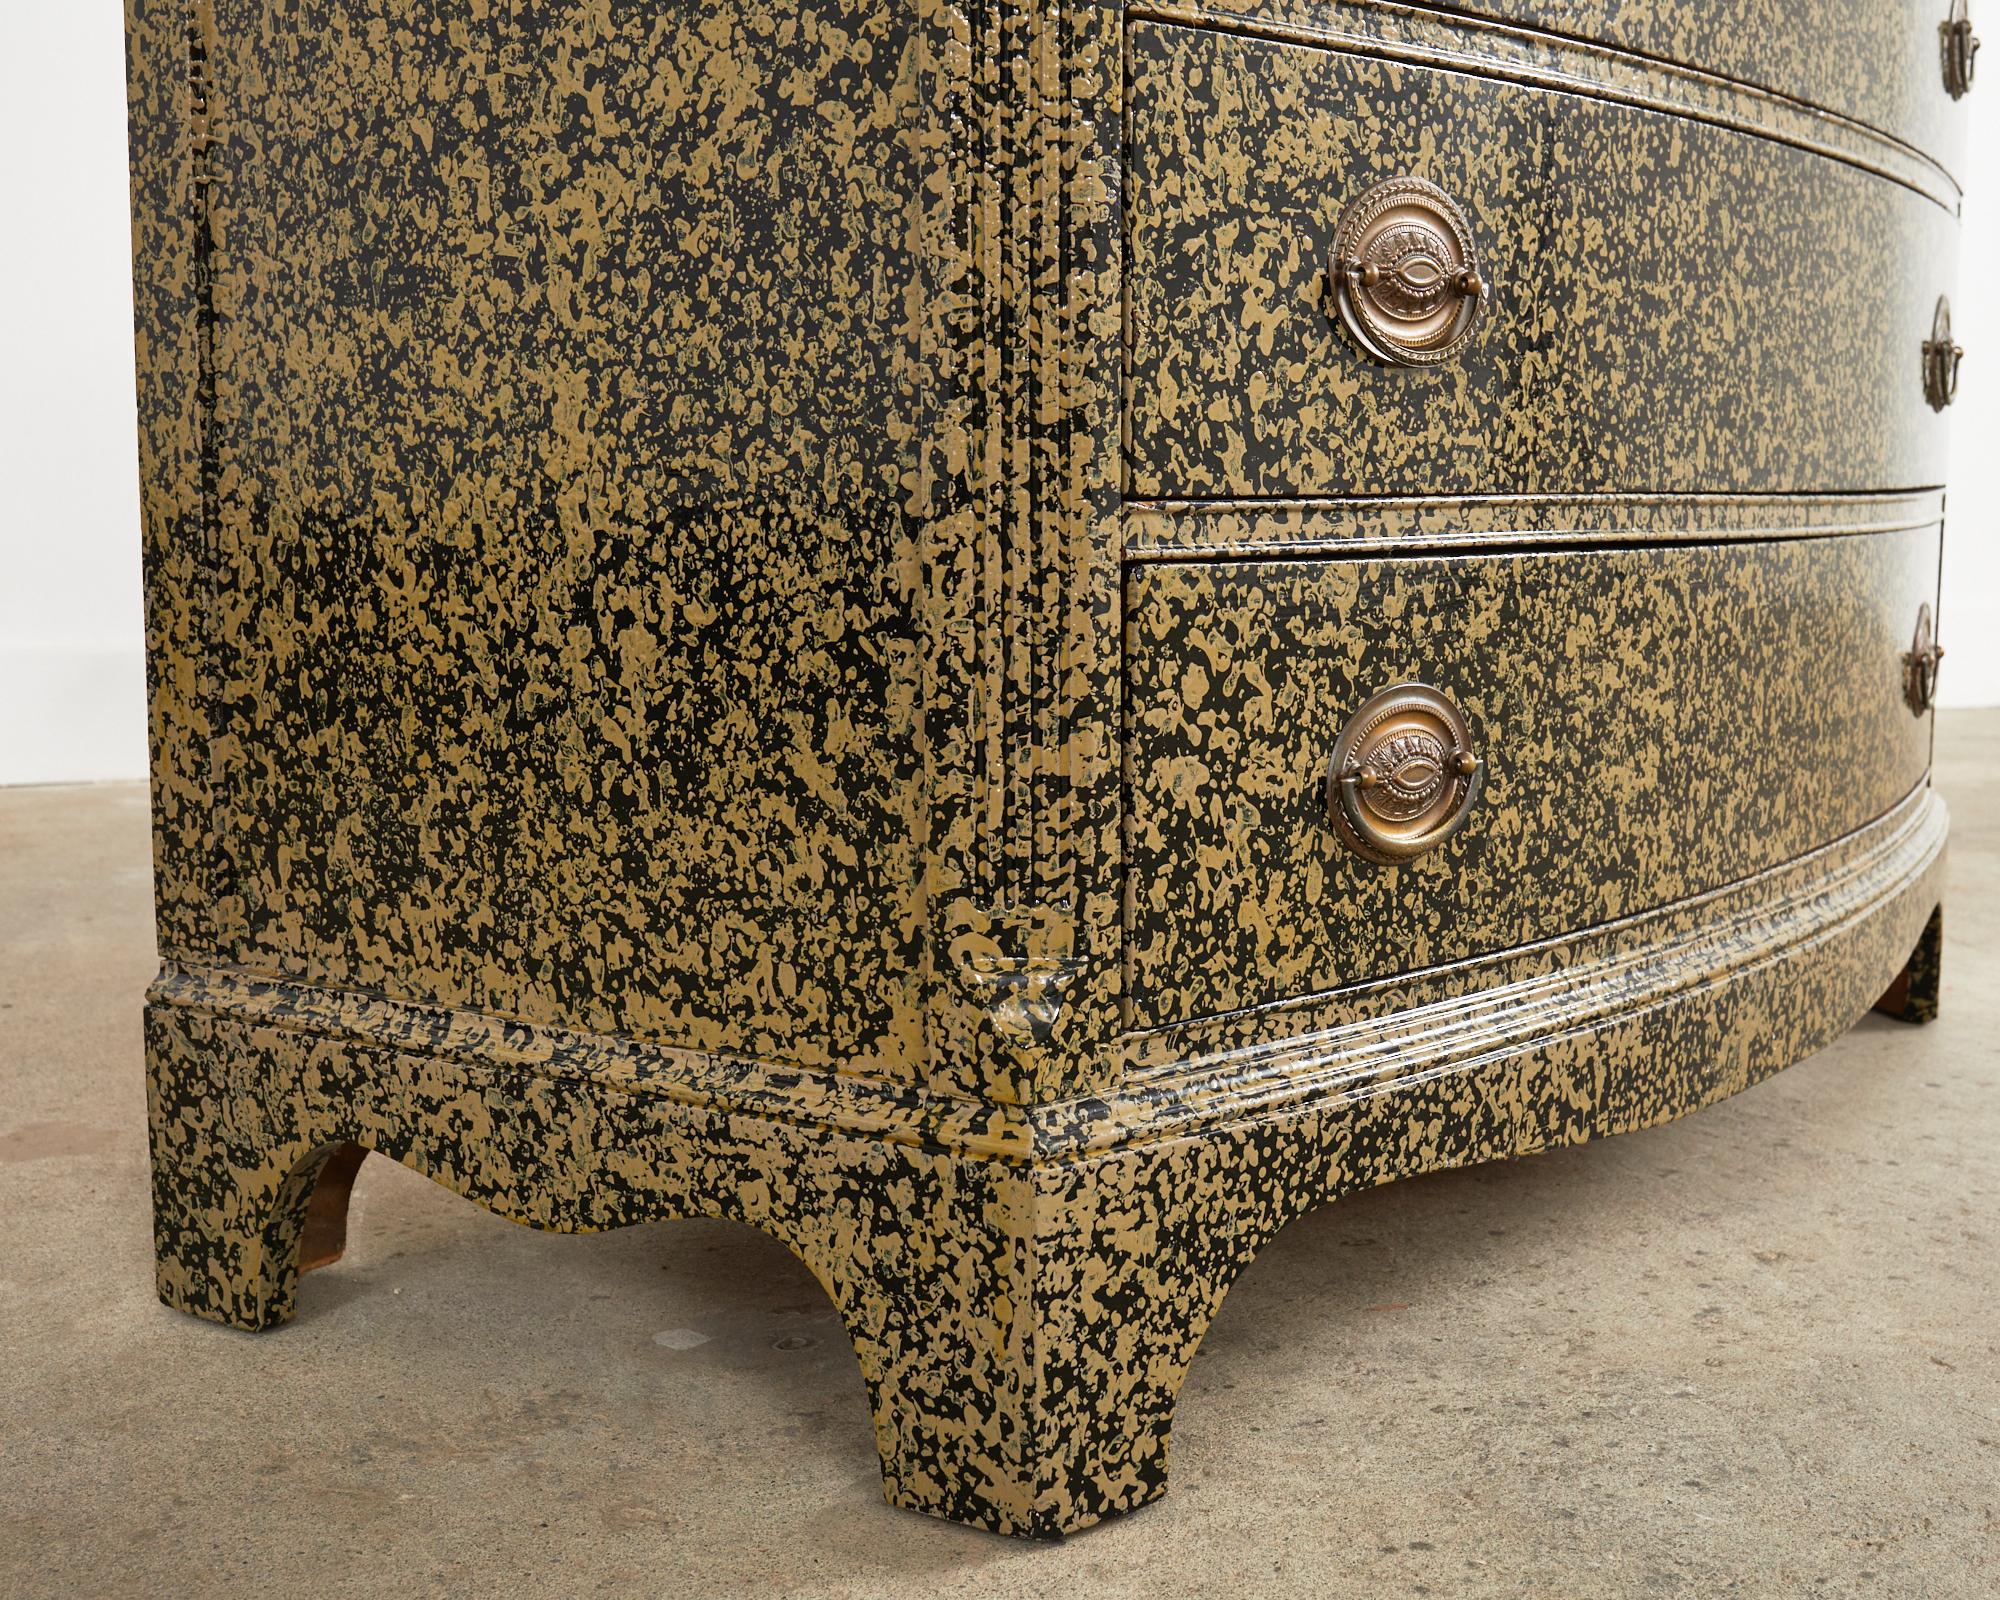 19th Century English Georgian Commode Speckled by Ira Yeager 10